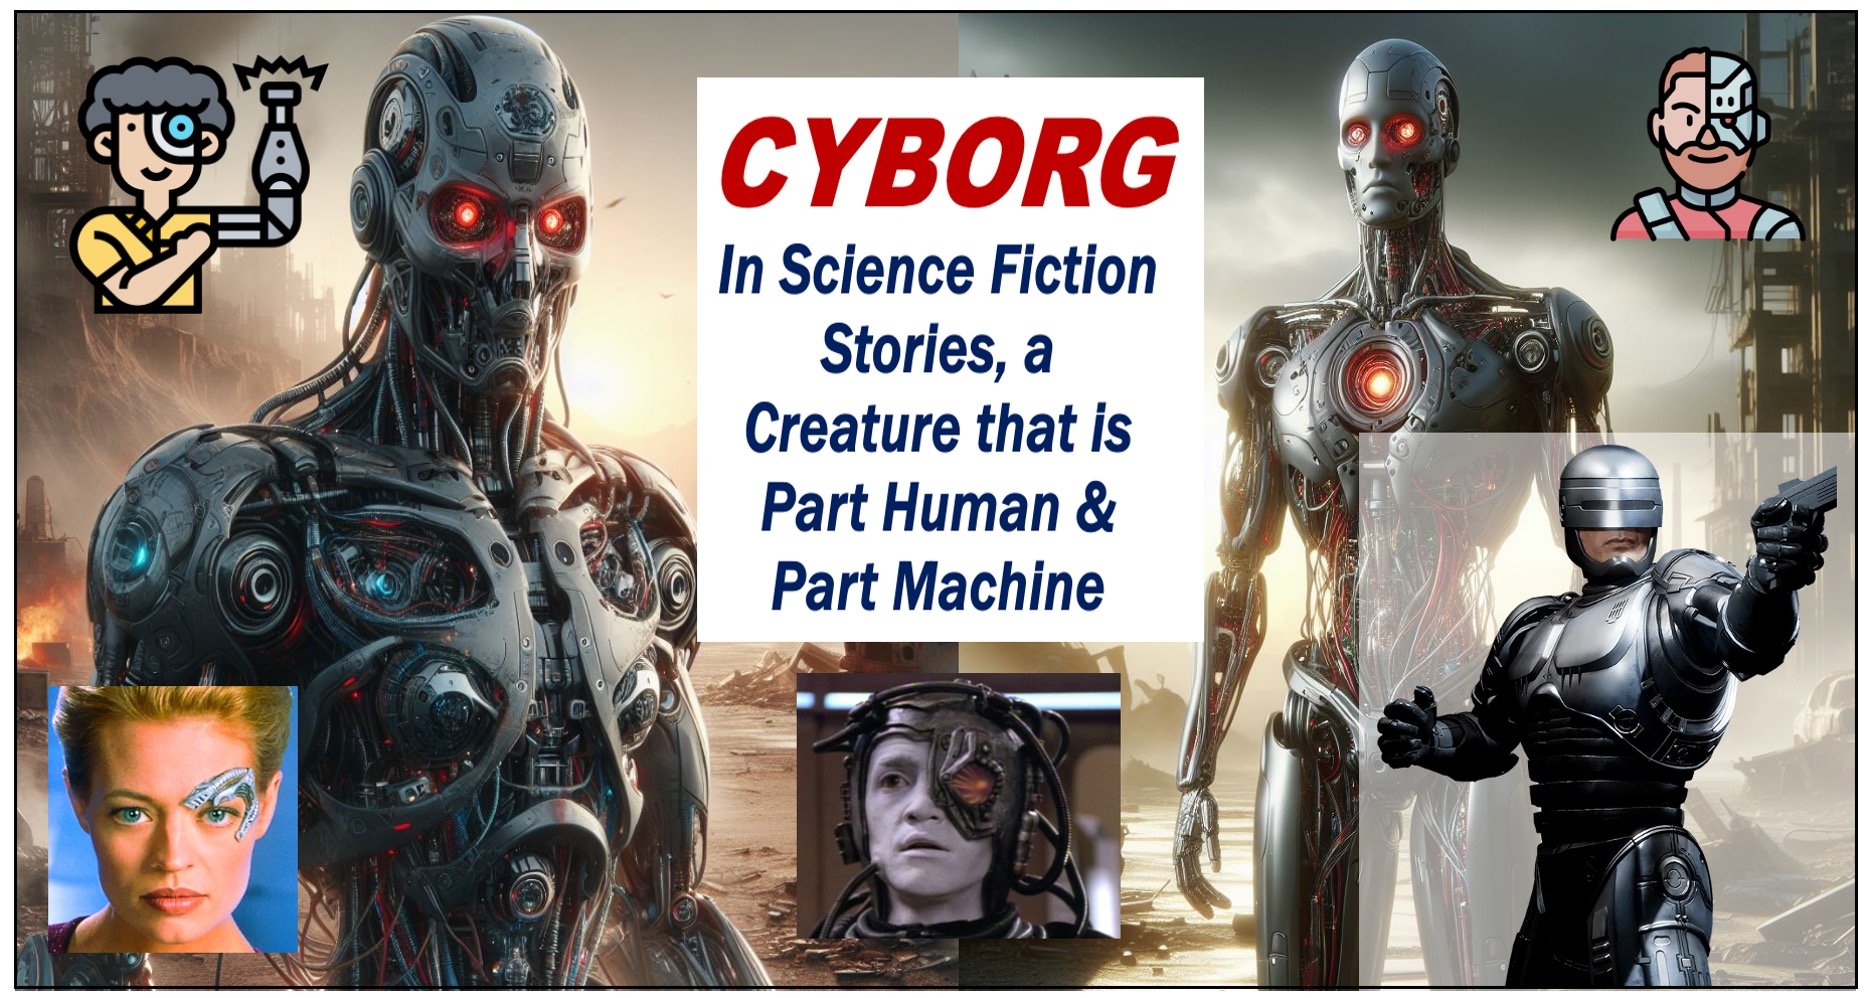 Several images of cyborgs plus a definition.